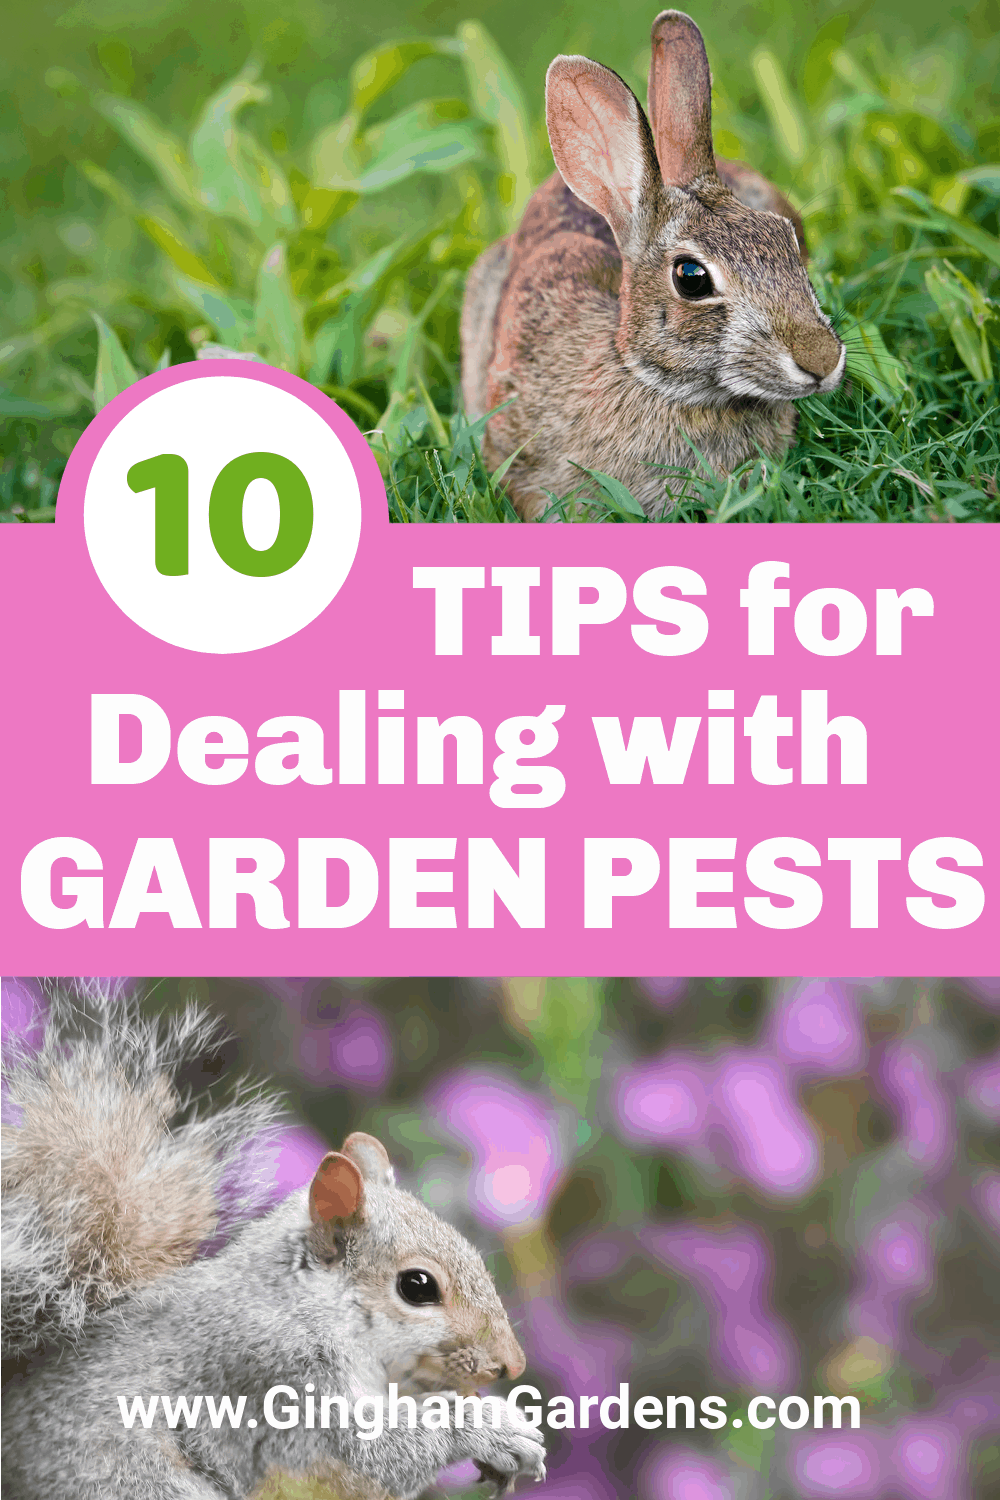 Images of squirrel and rabbit in gardens with text overlay - 10 Tips for Dealing with Garden Pests